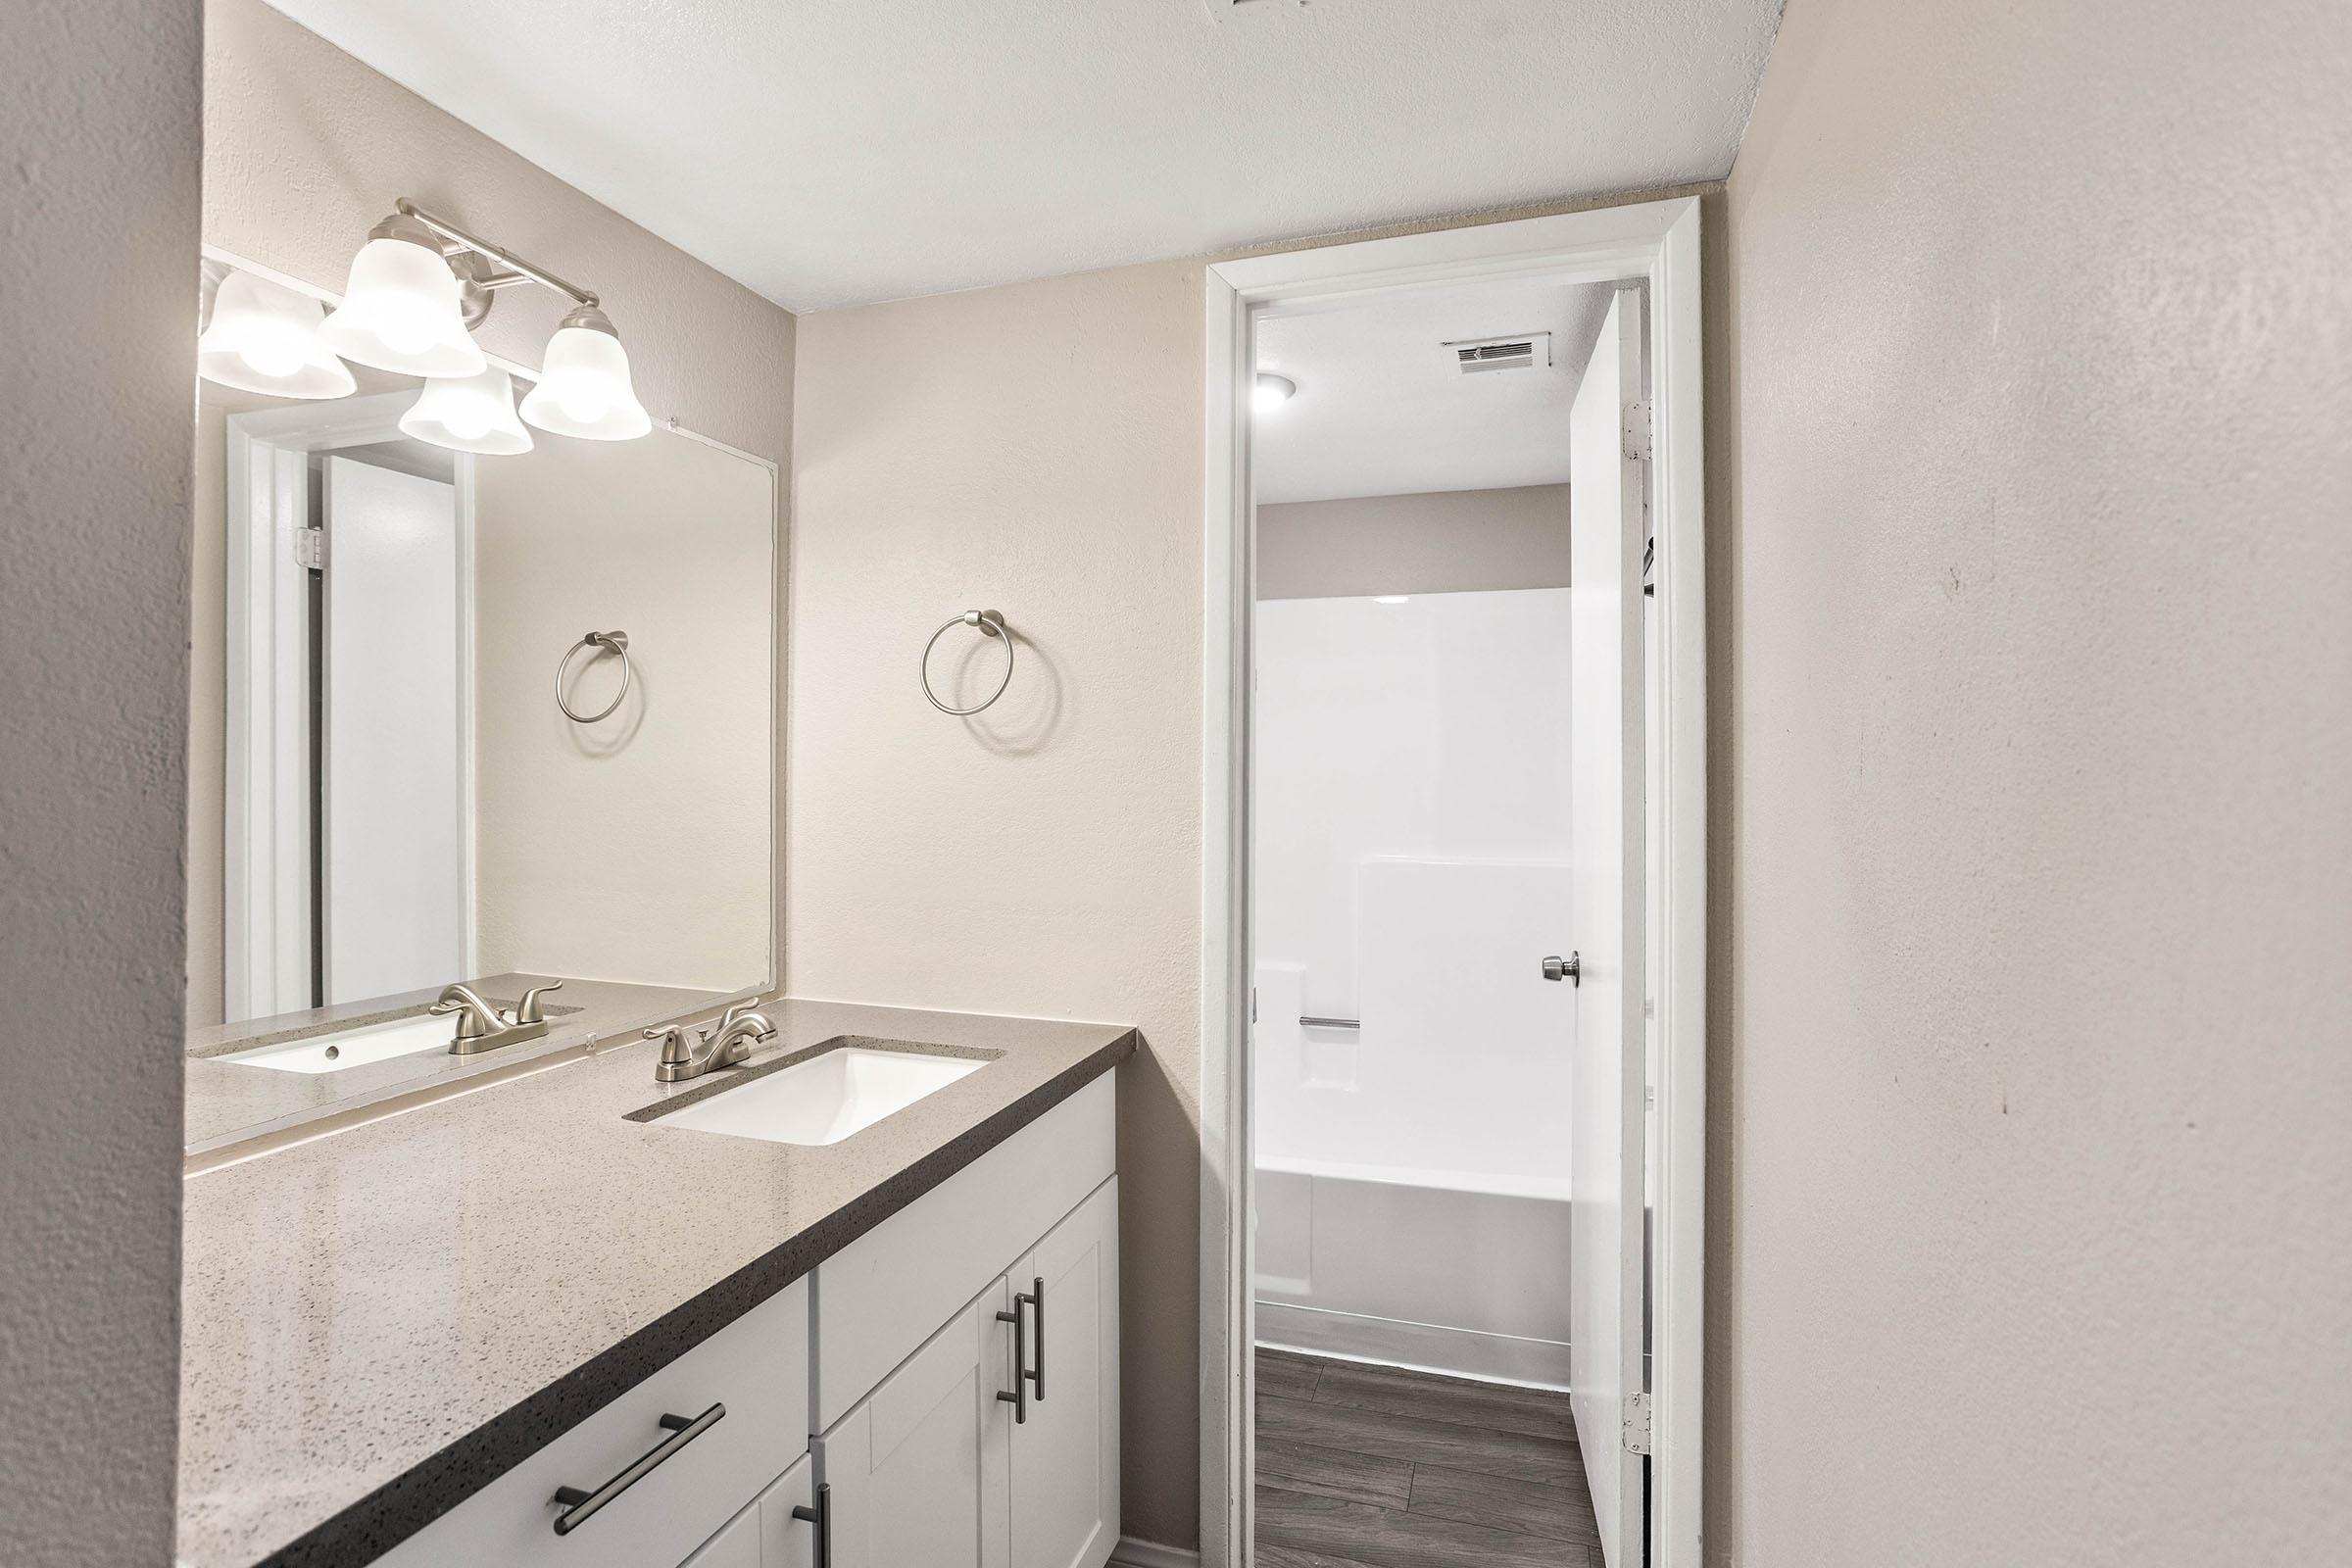 renovated bathroom with quartz countertops and separate shower and toilet room